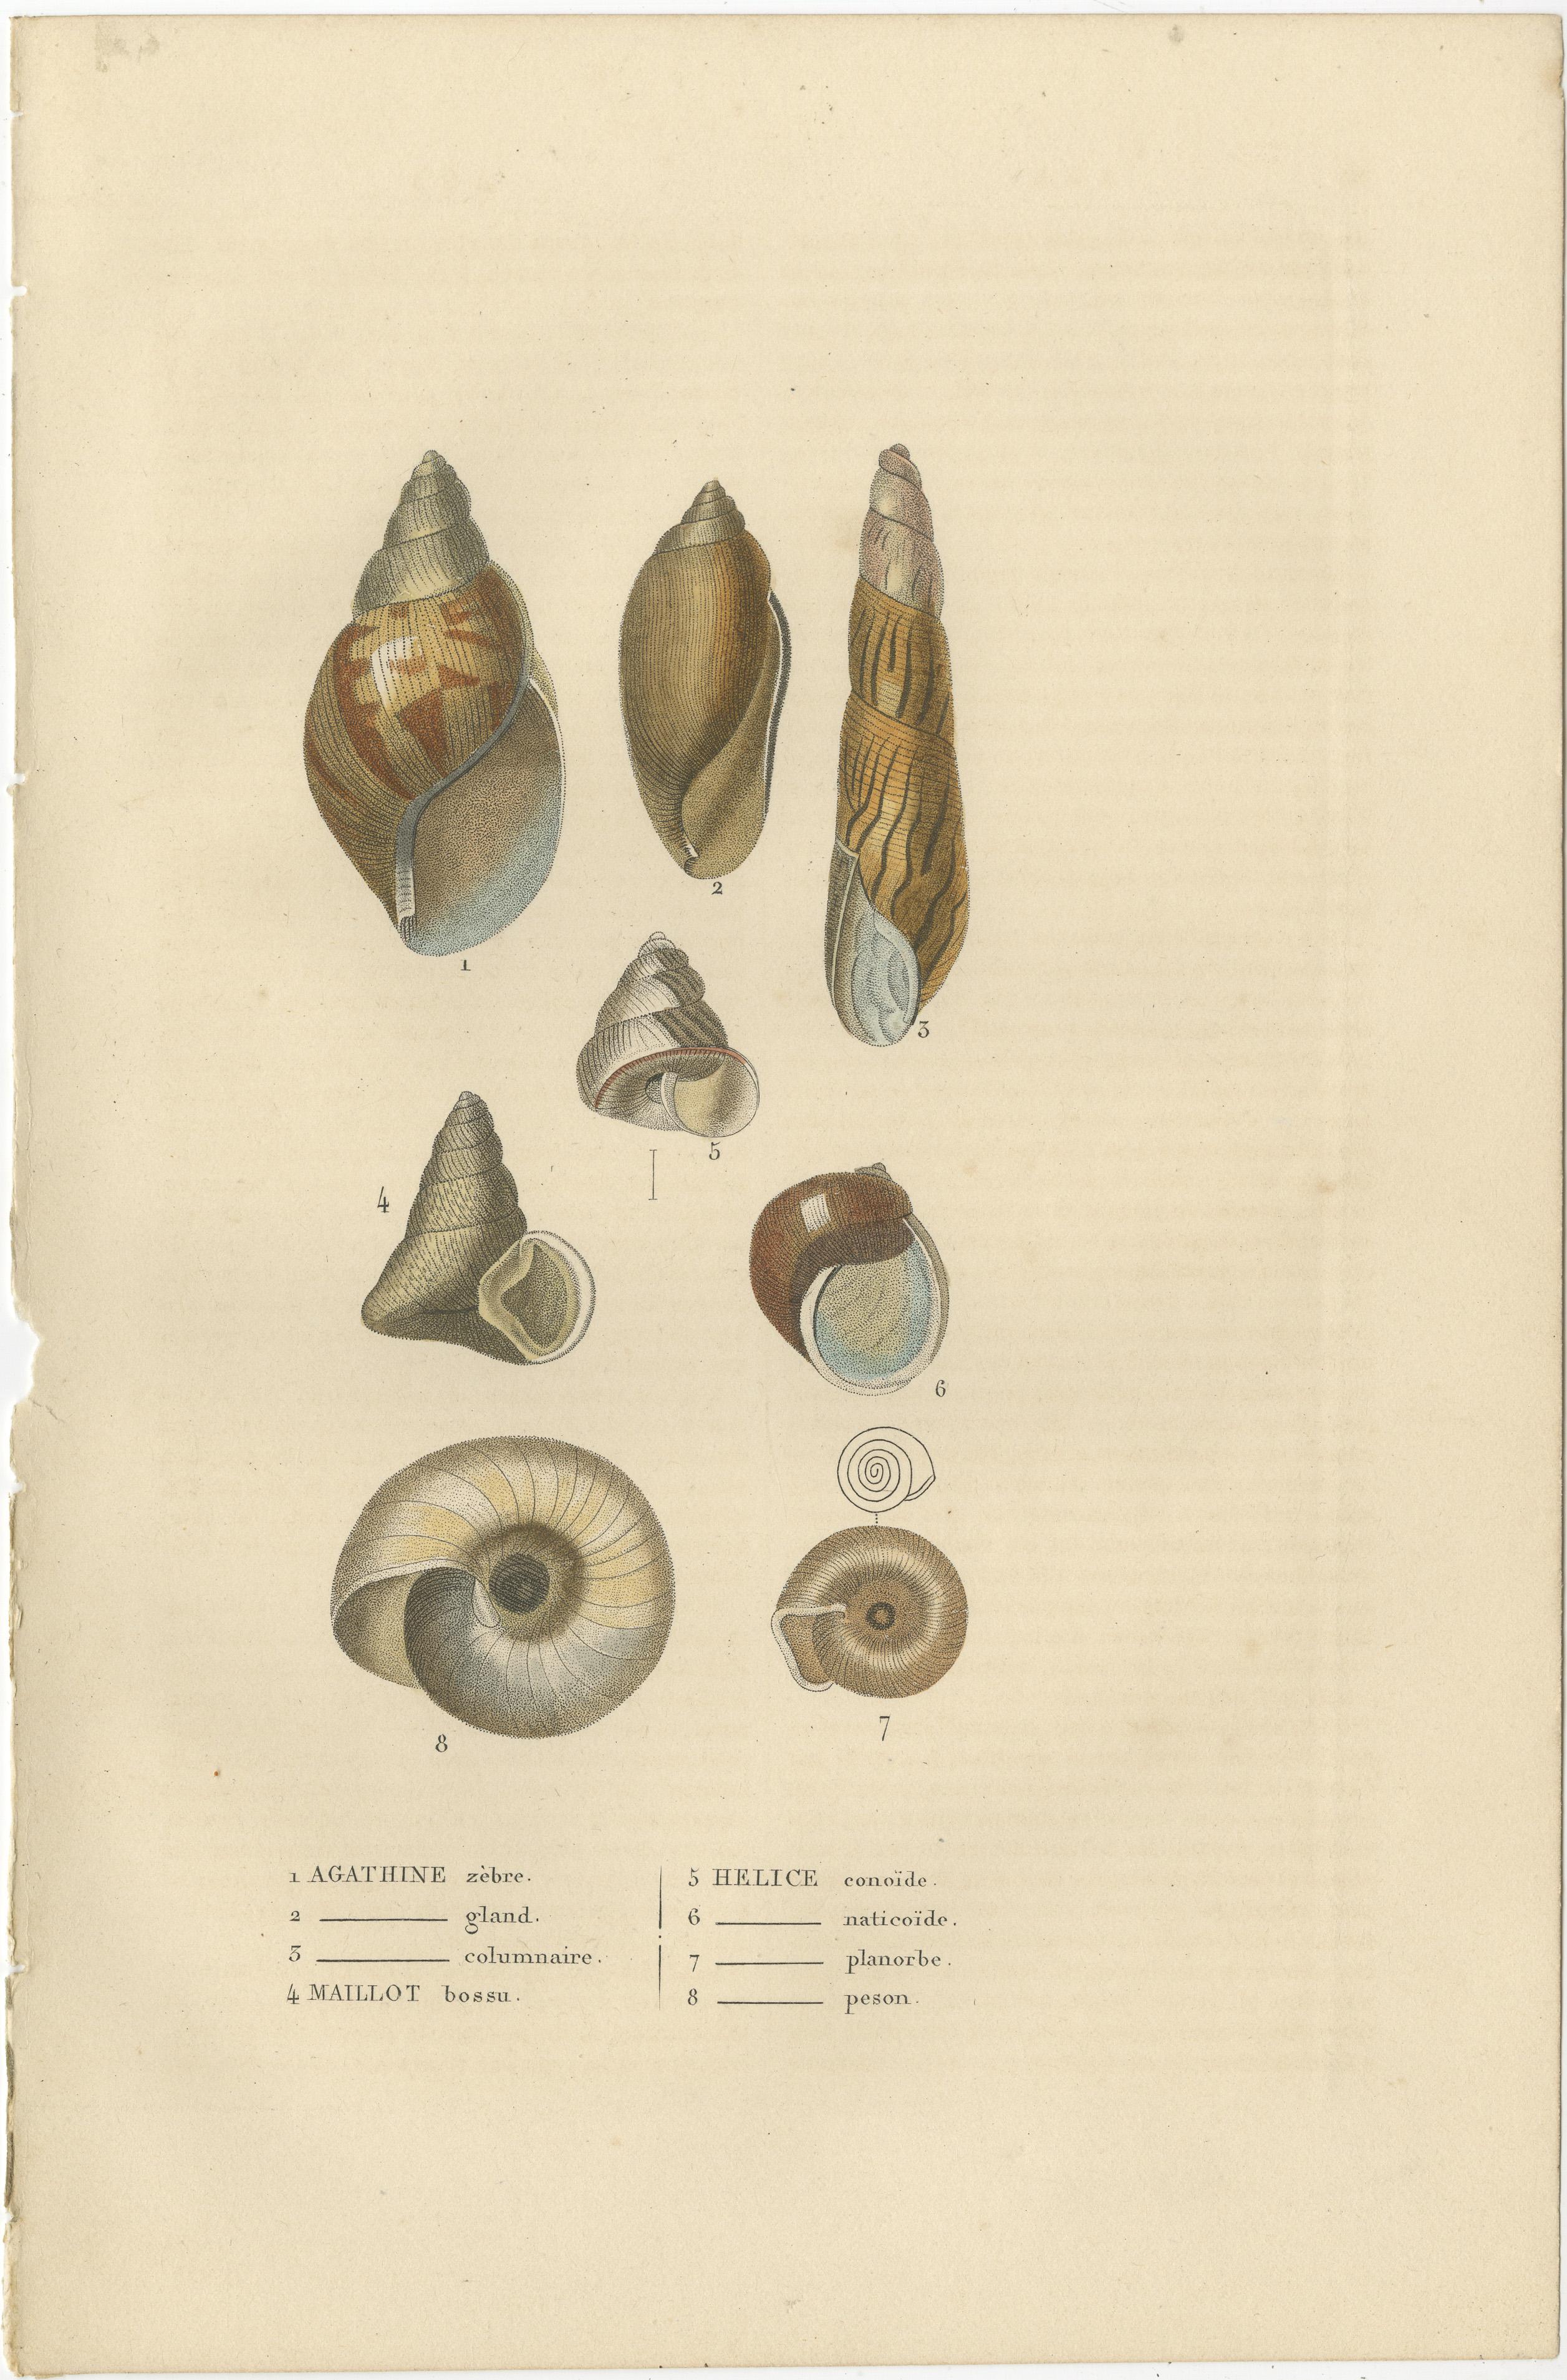 In the two prints, a variety of marine organisms are depicted, predominantly from the echinoderm and mollusk phyla:

**First Print:**
1. **Agathine zébrée** - Likely a gastropod with a zebra-like pattern on its shell.
2. **----- gland** - The name